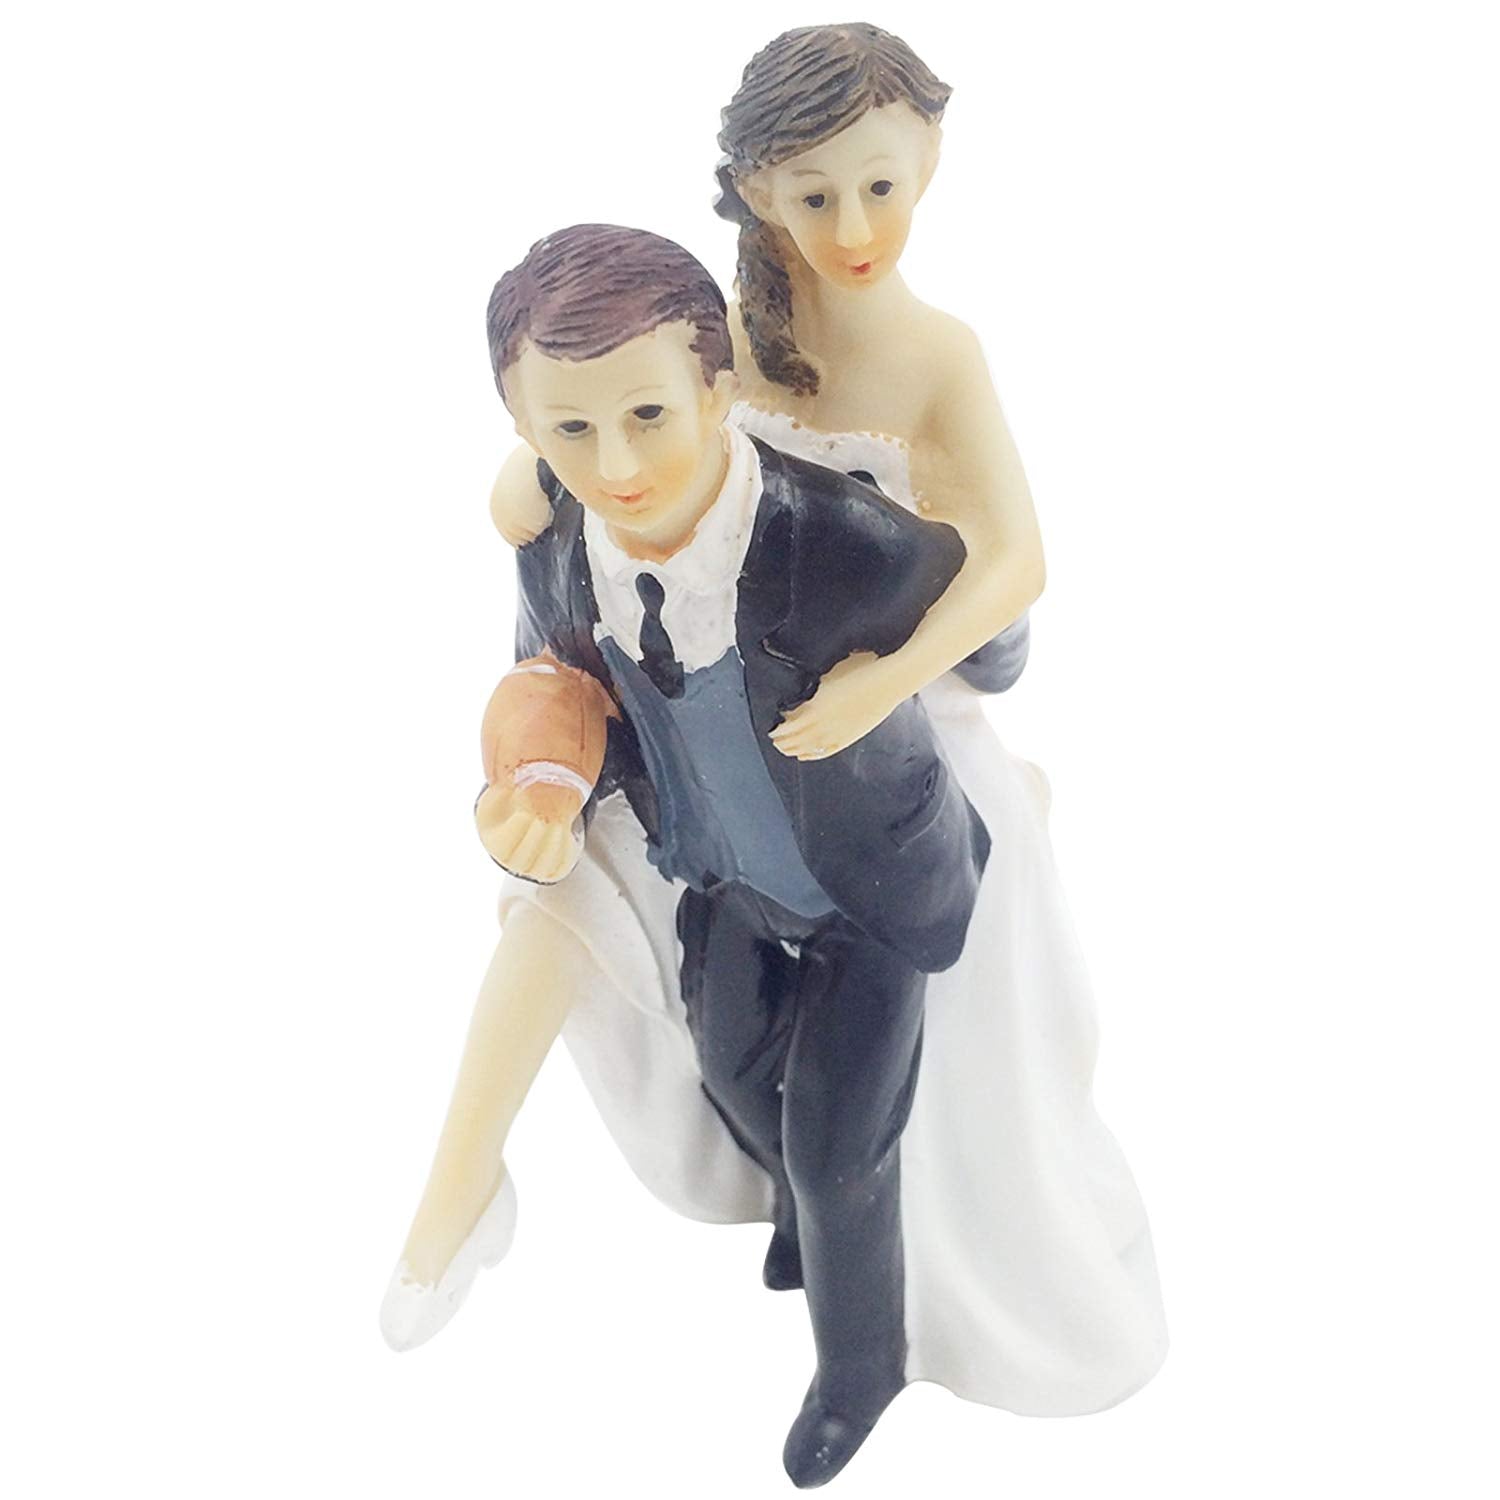 American Football Rugby Couple Bride and Groom Wedding Cake Topper 6 Inch